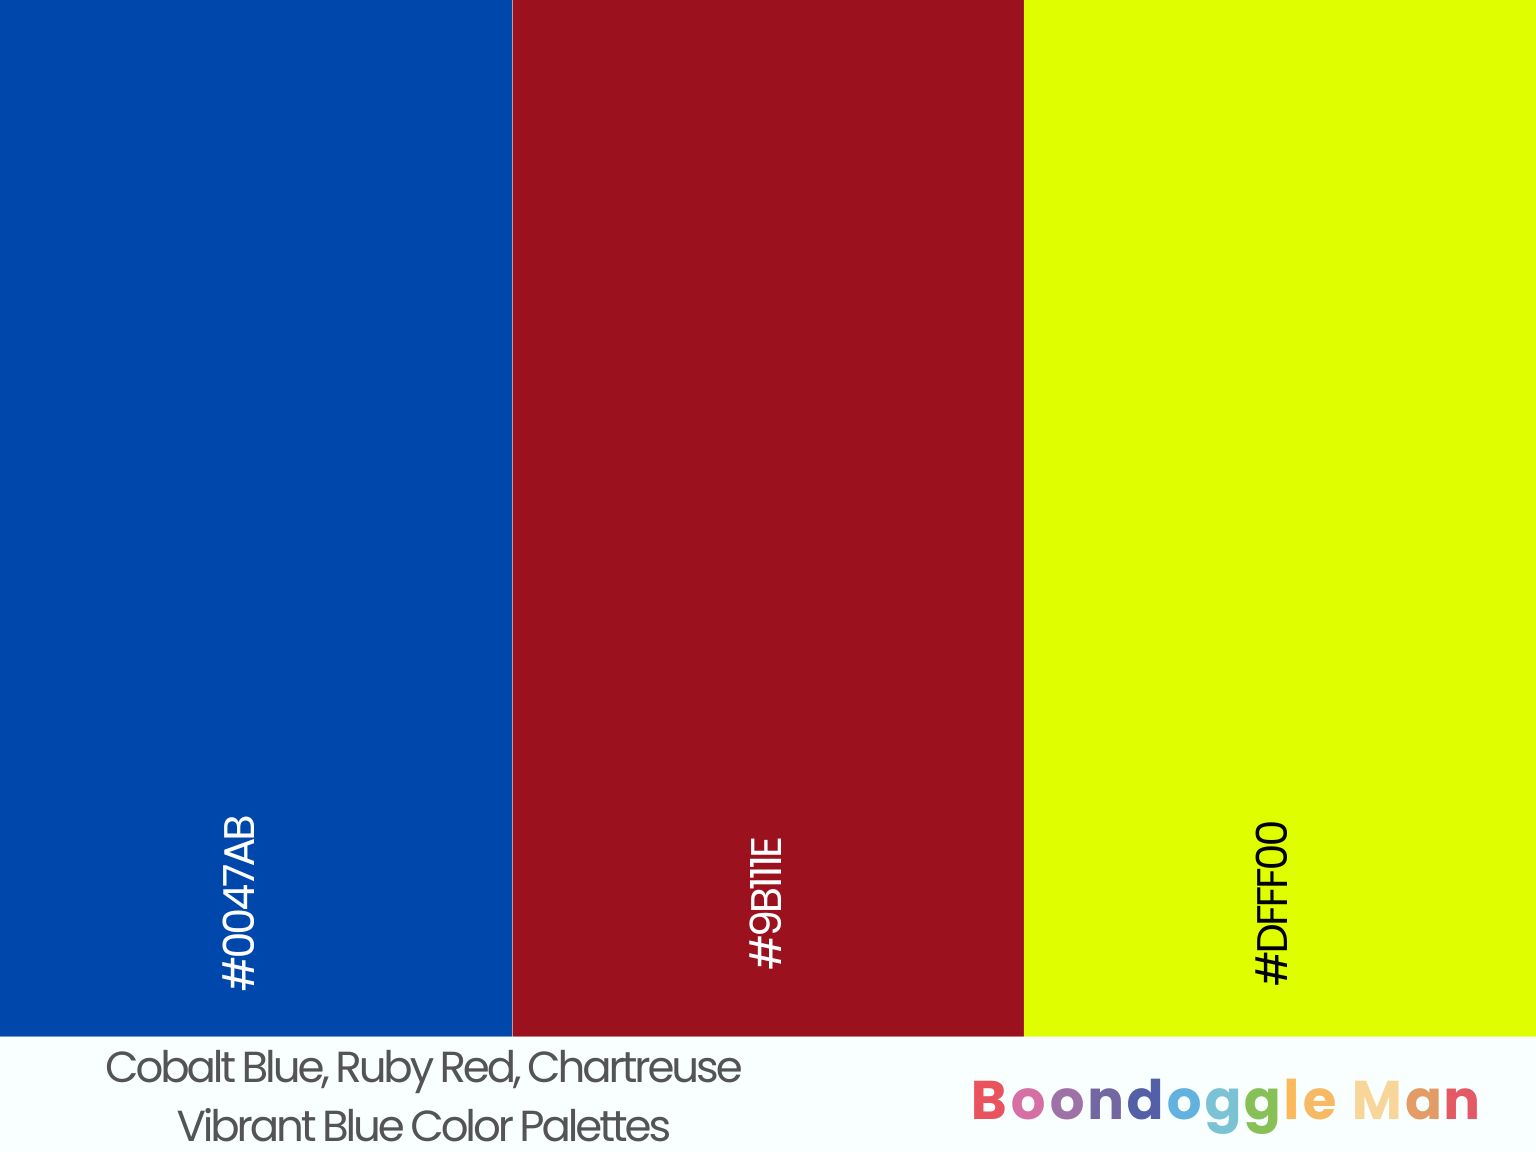 Cobalt Blue, Ruby Red, Chartreuse